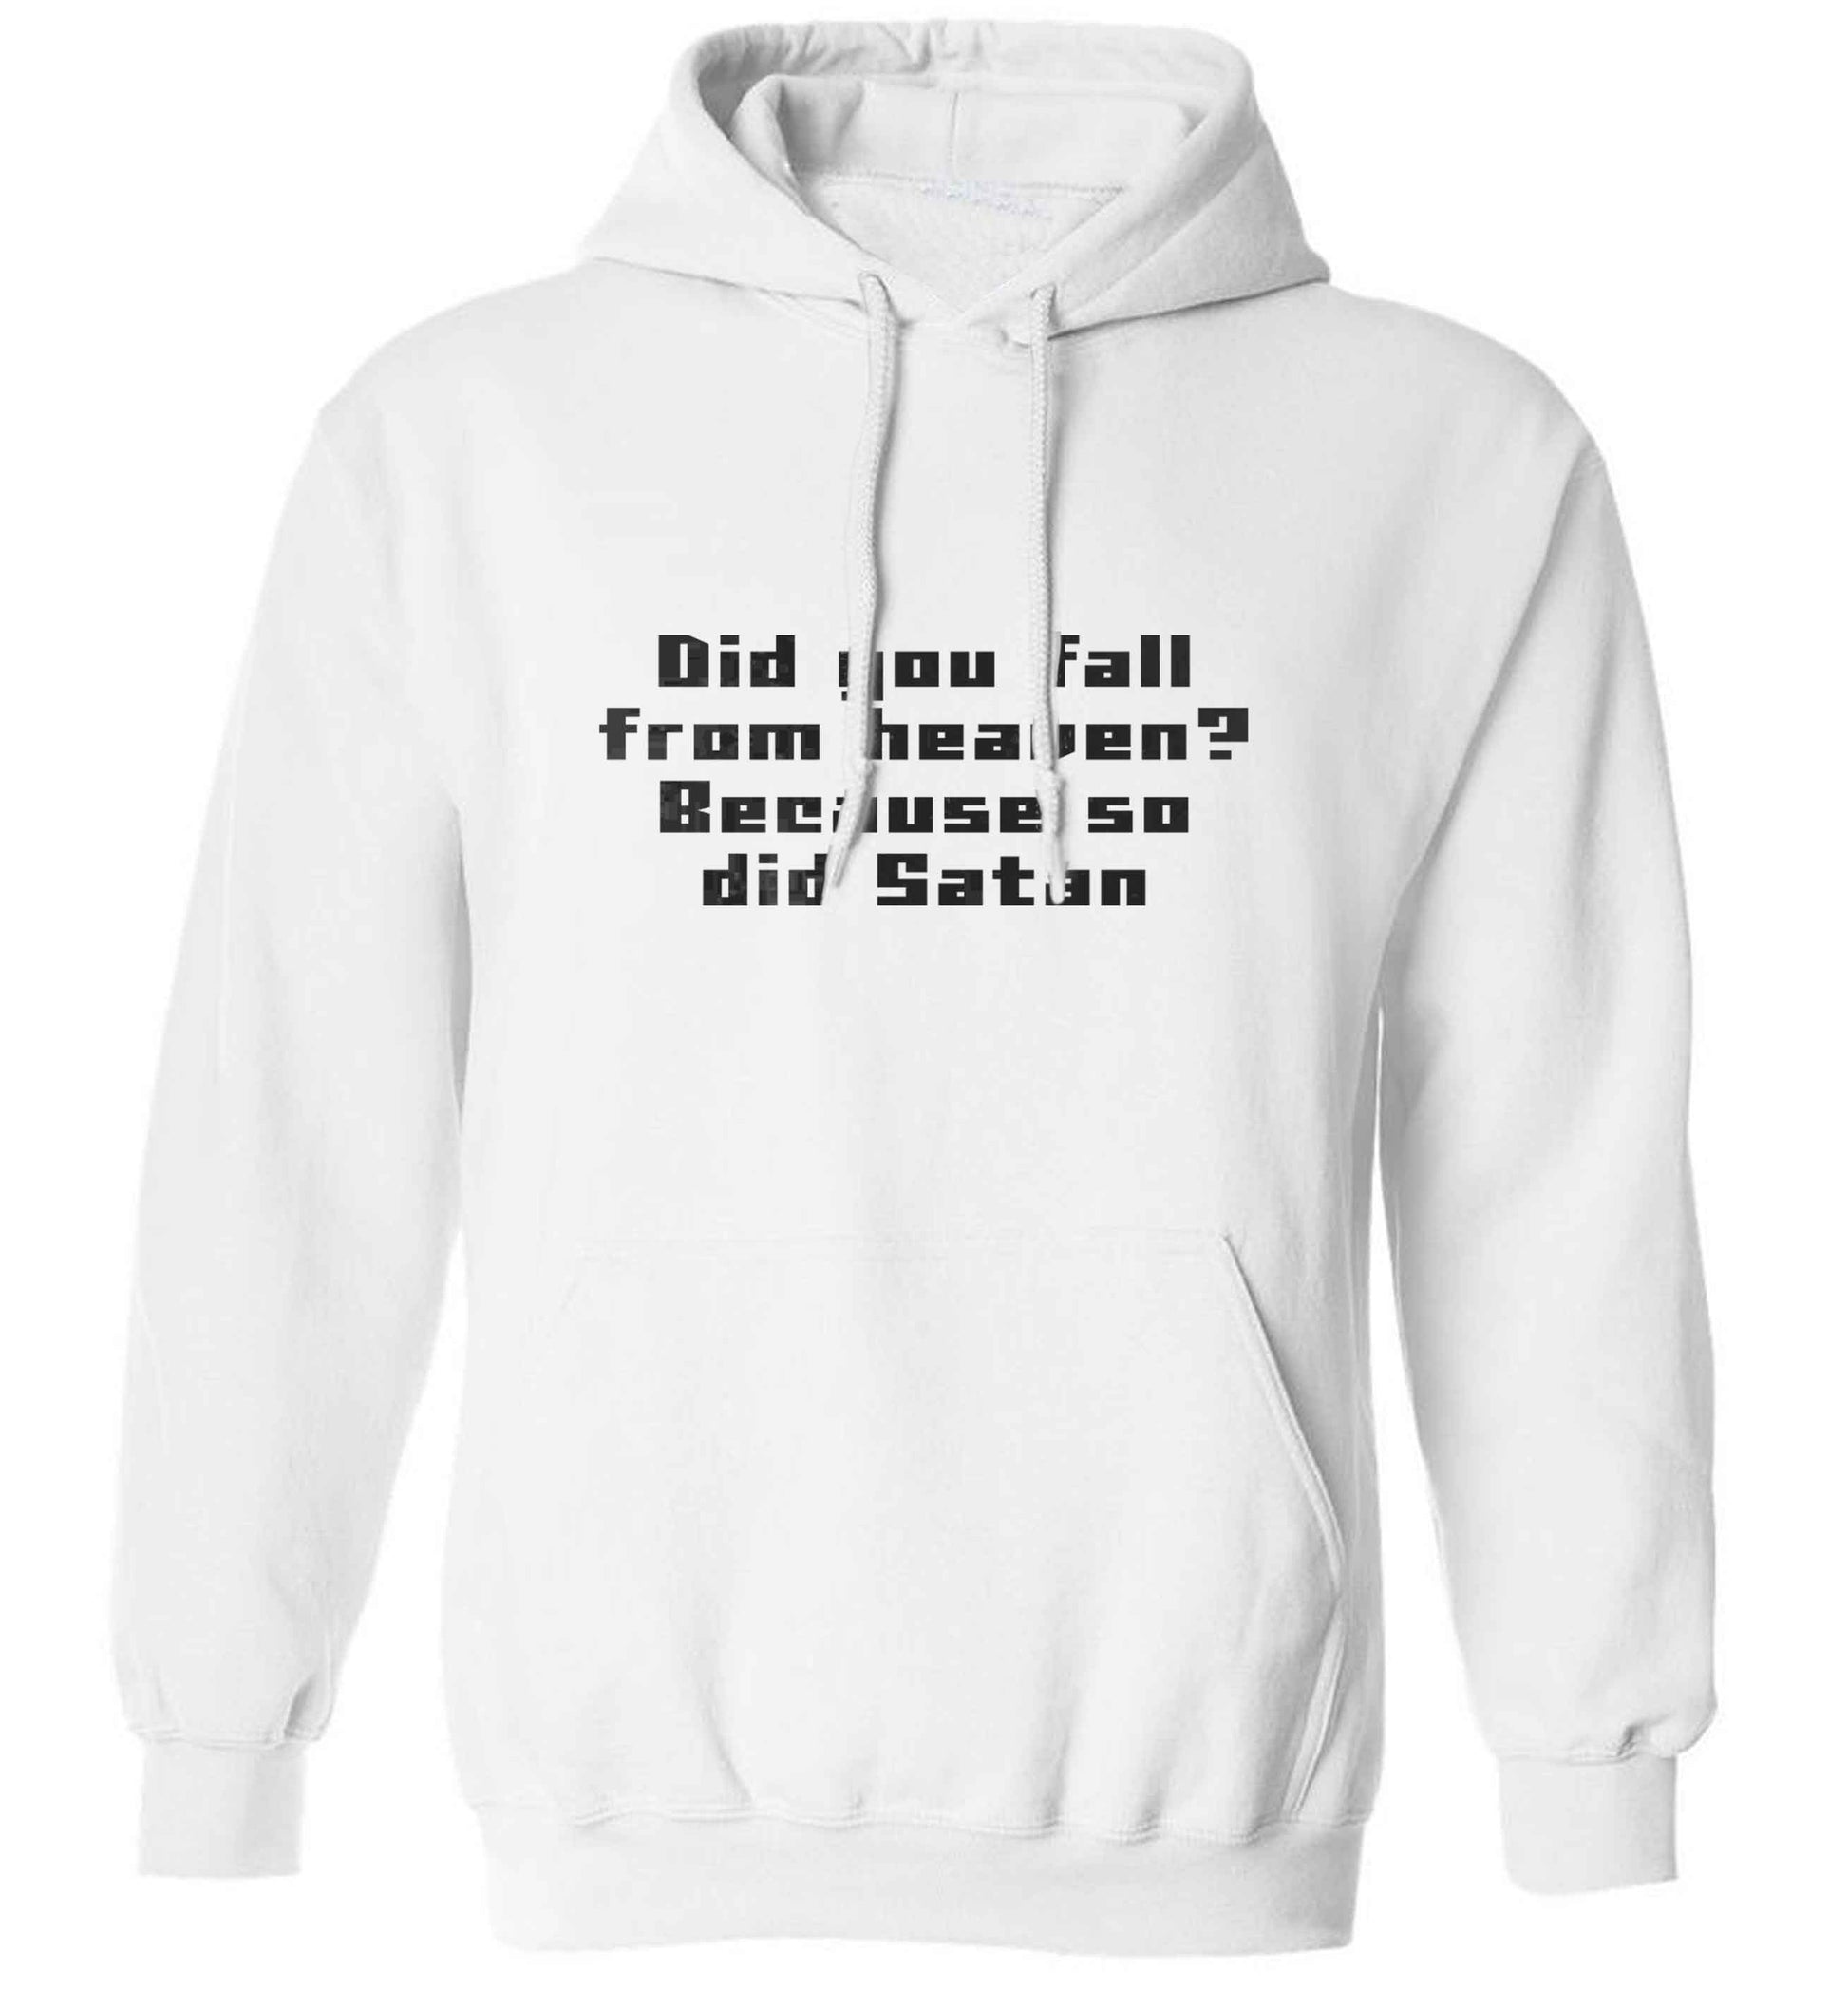 Did you fall from Heaven because so did Satan adults unisex white hoodie 2XL